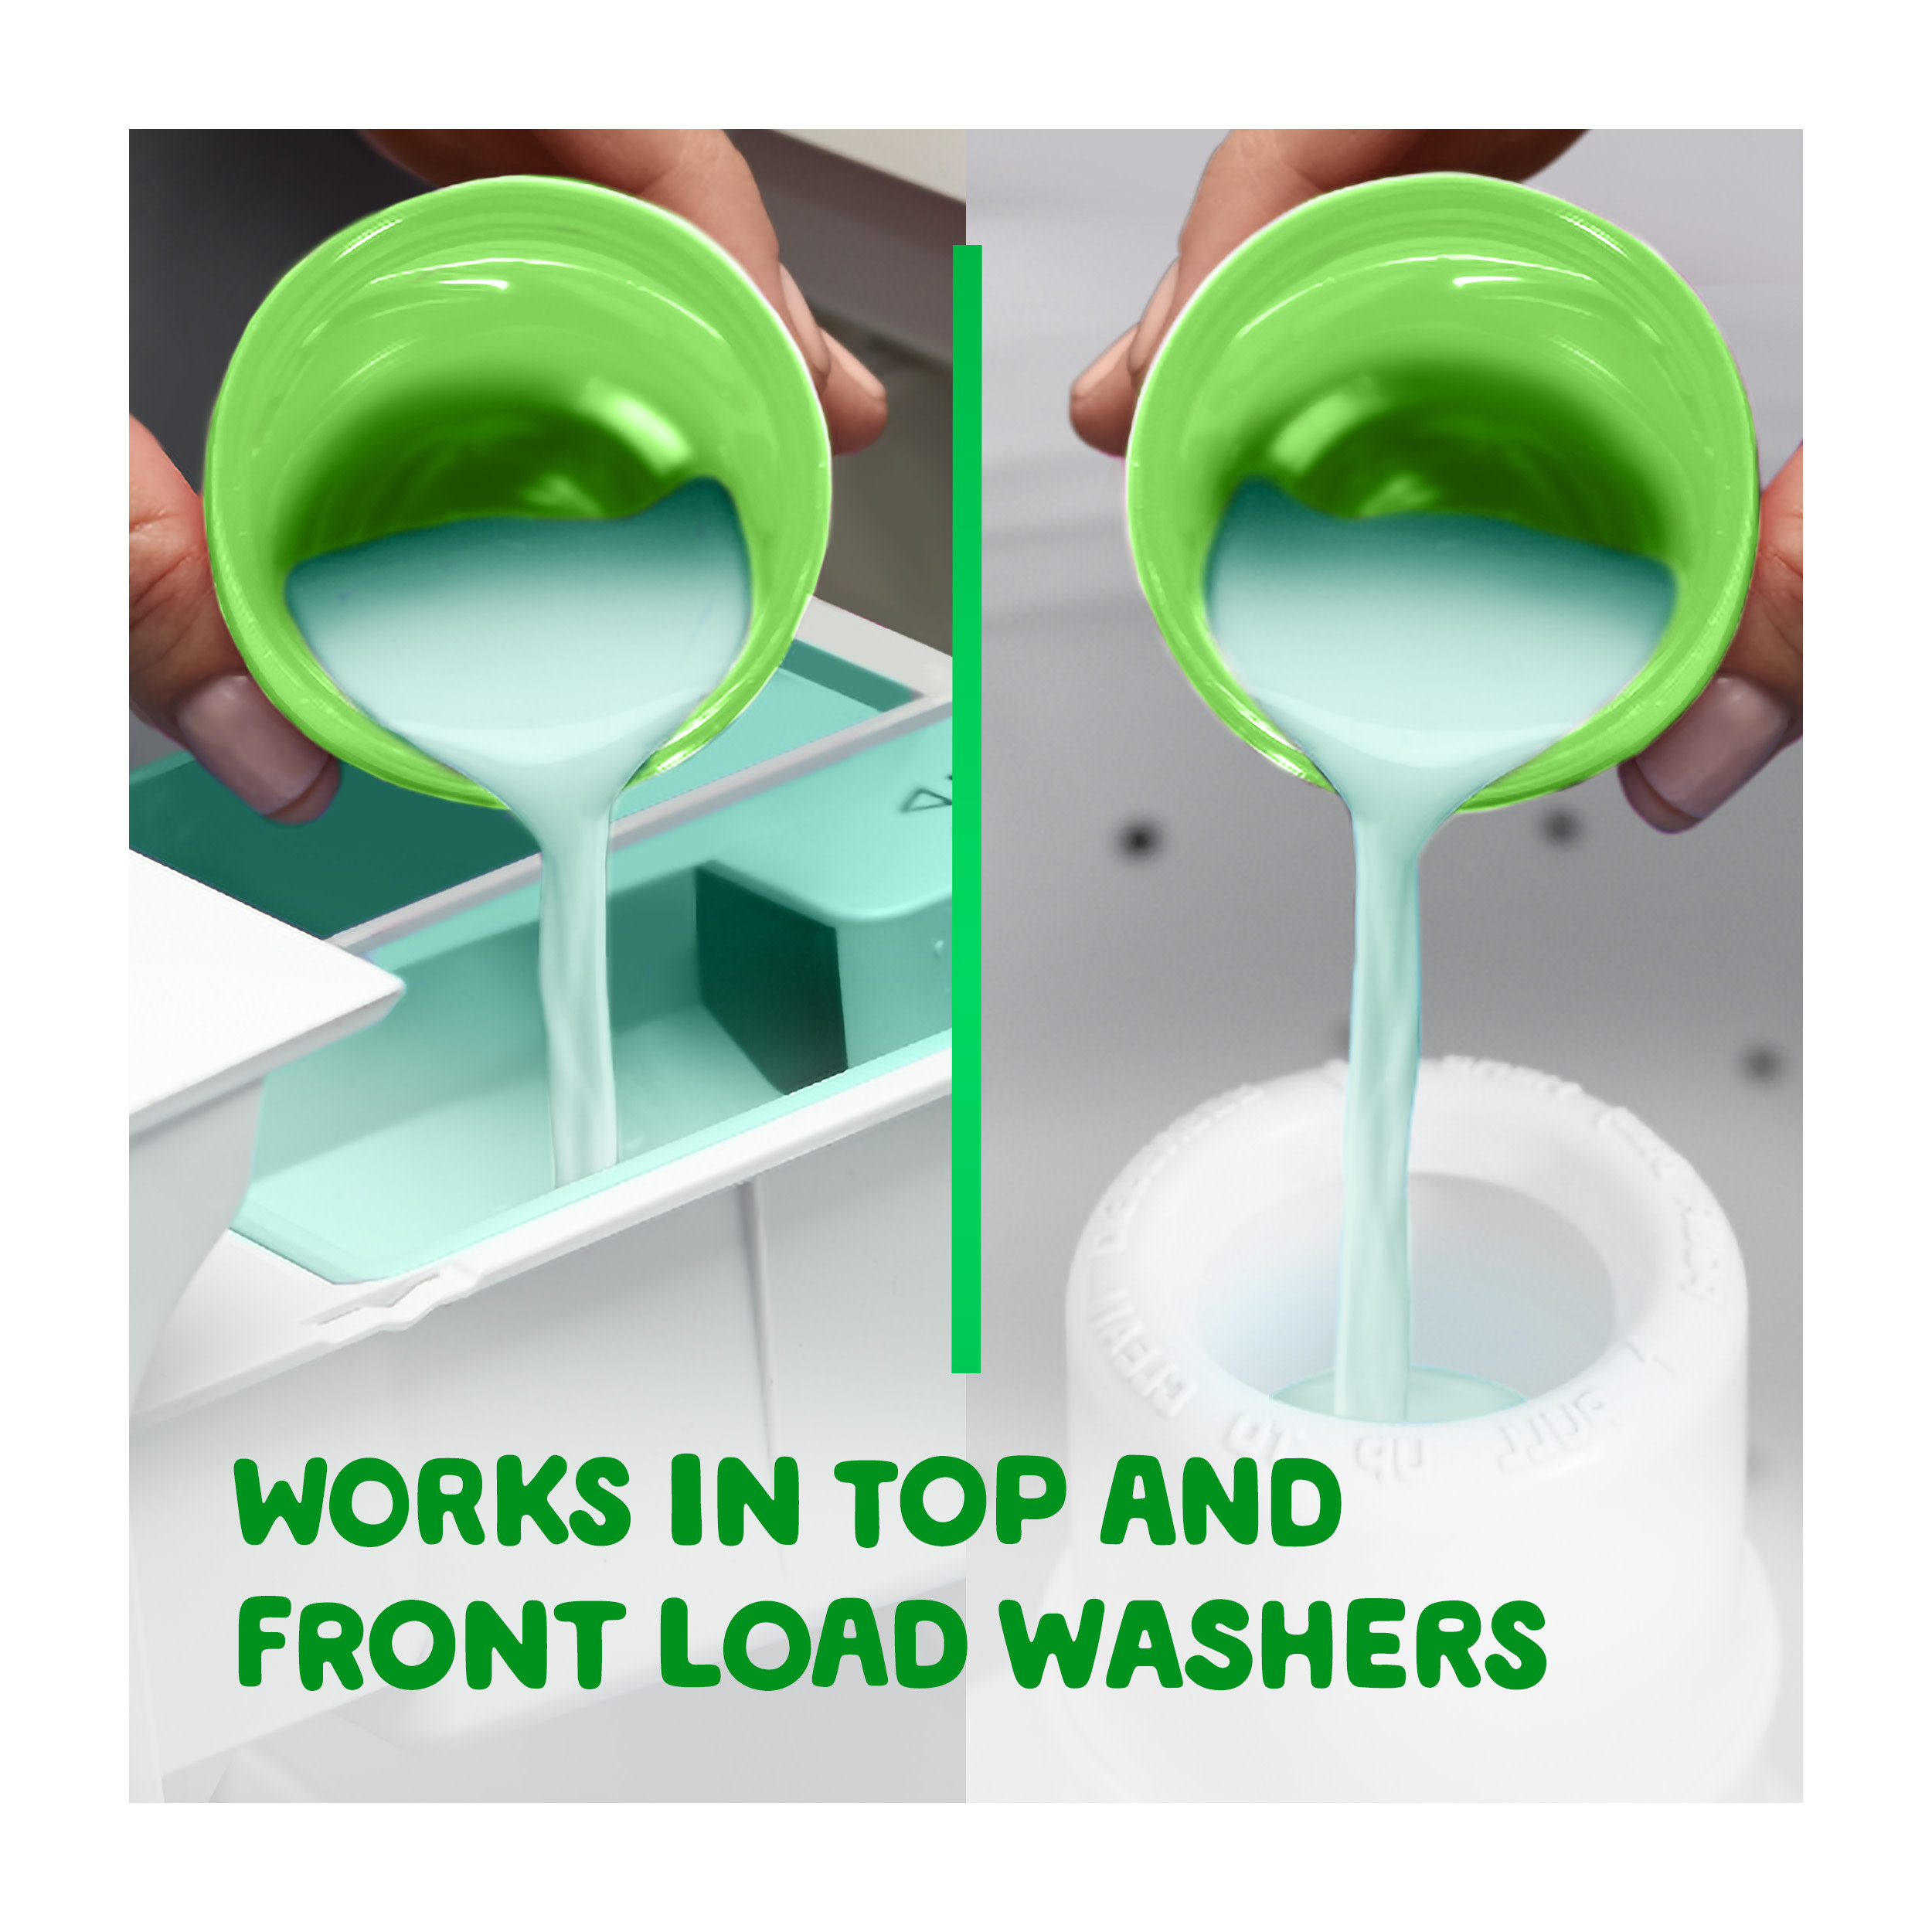 Gain Original Fabric Softener works in top and front load washers